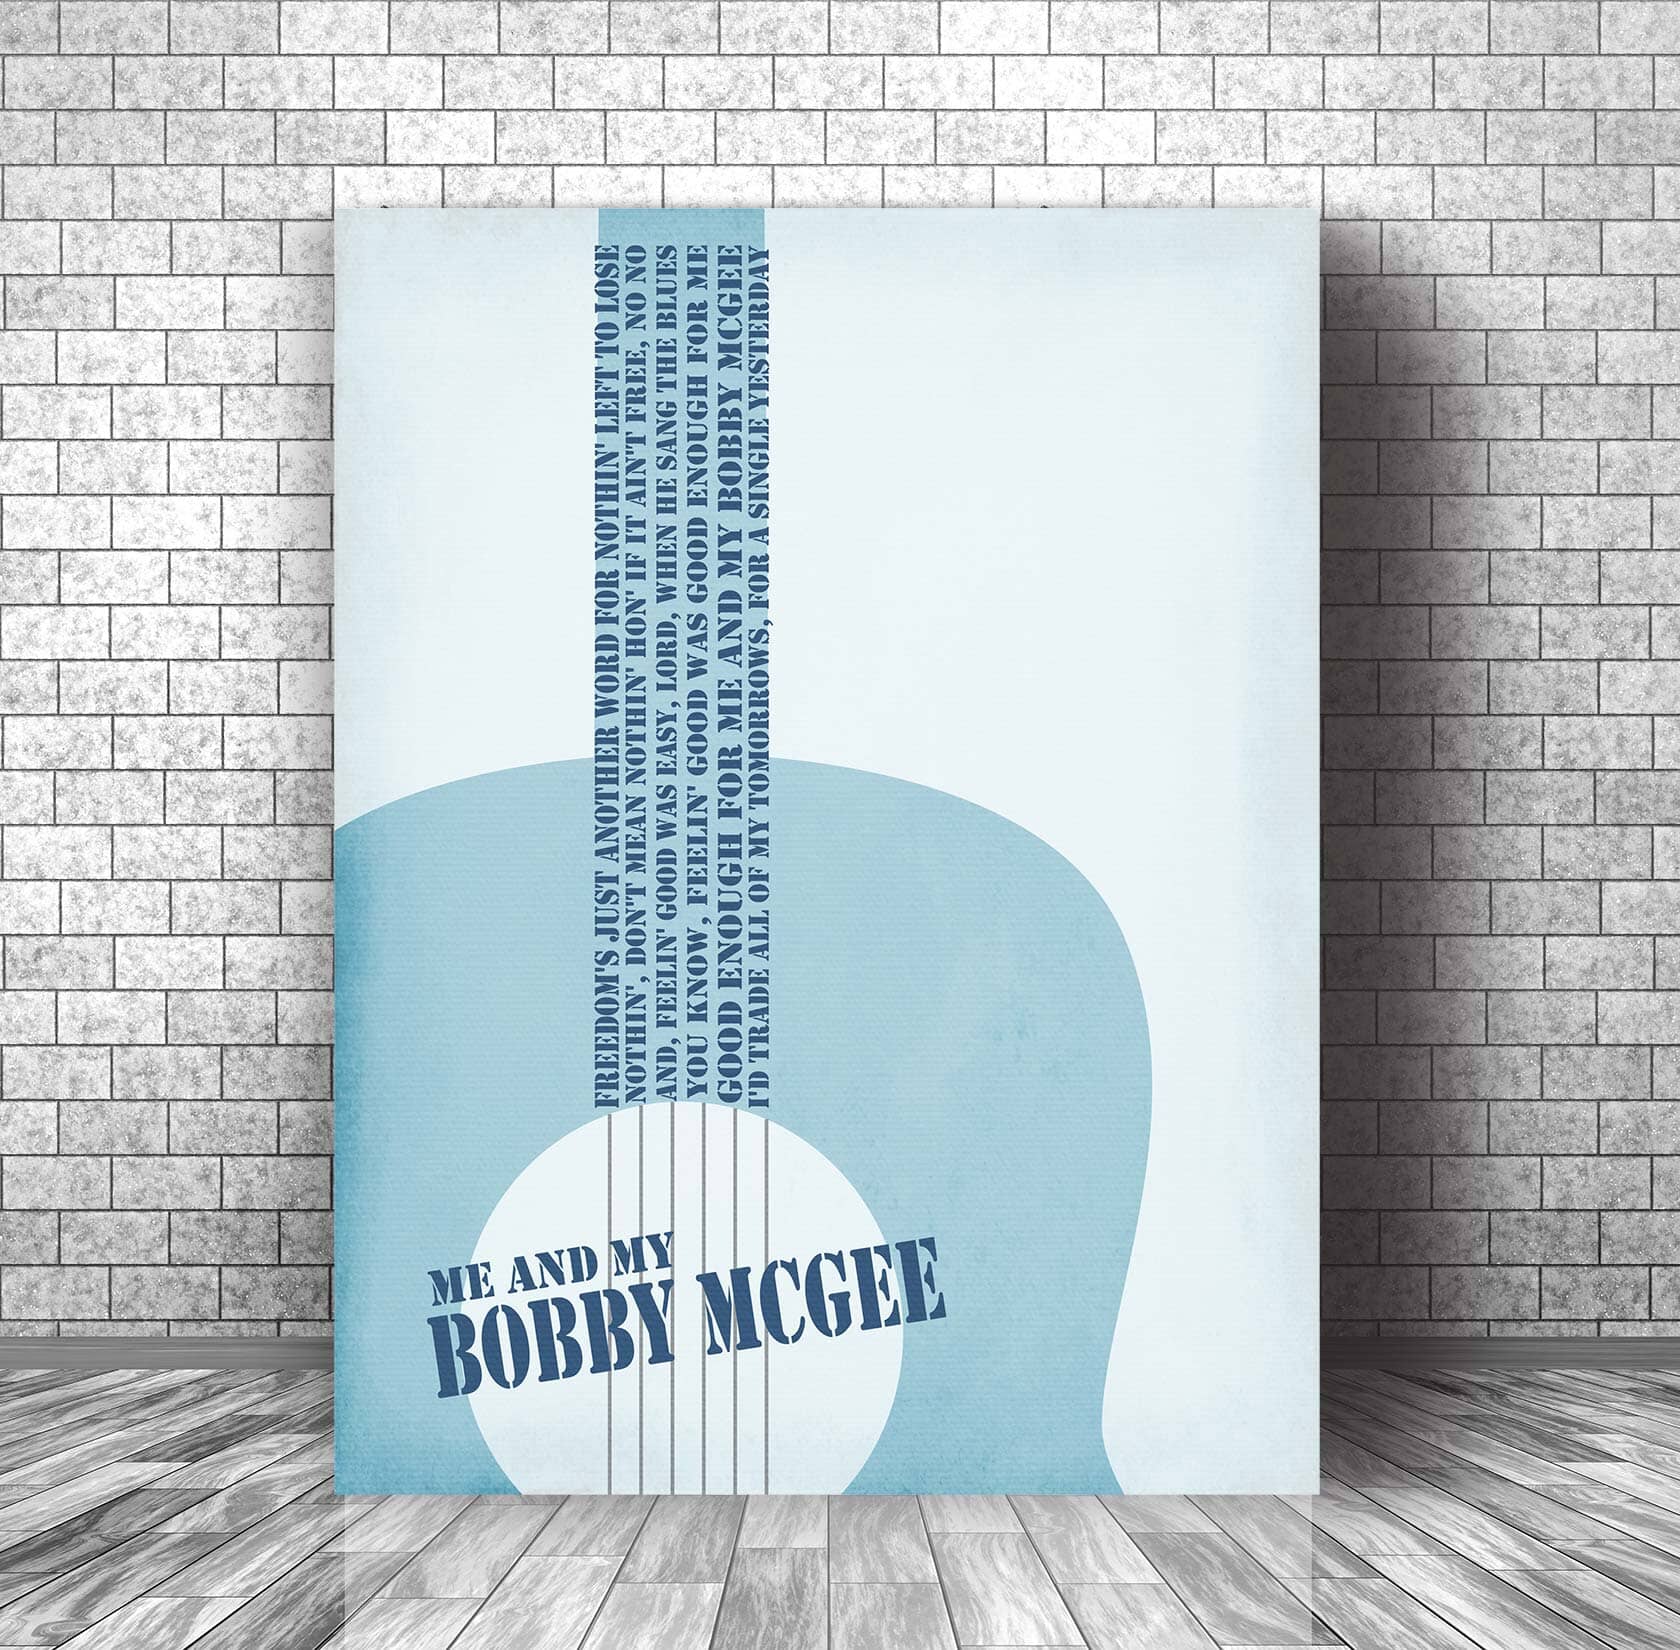 Me and Bobby McGee by Janis Joplin - Song Lyrics Poster Song Lyrics Art Song Lyrics Art 11x14 Canvas Wrap 